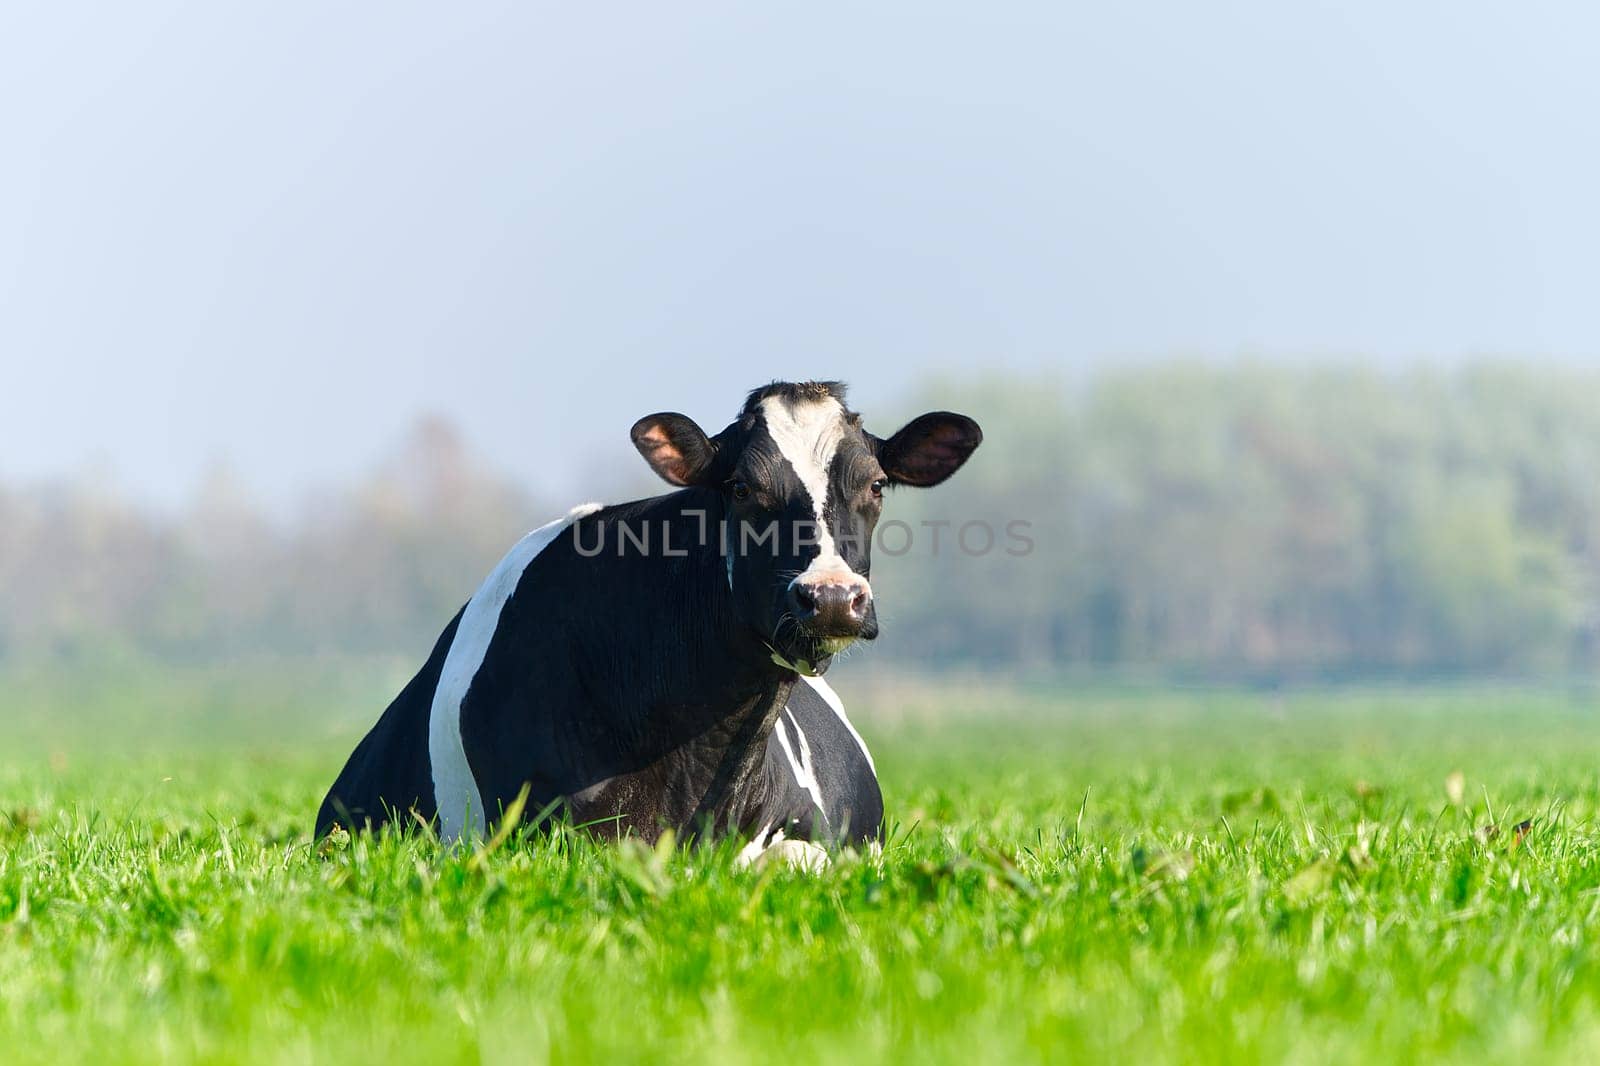 Cow on the lawn. Spotted cow grazing on beautiful green meadow. holstein cow, resting in a meadow by PhotoTime